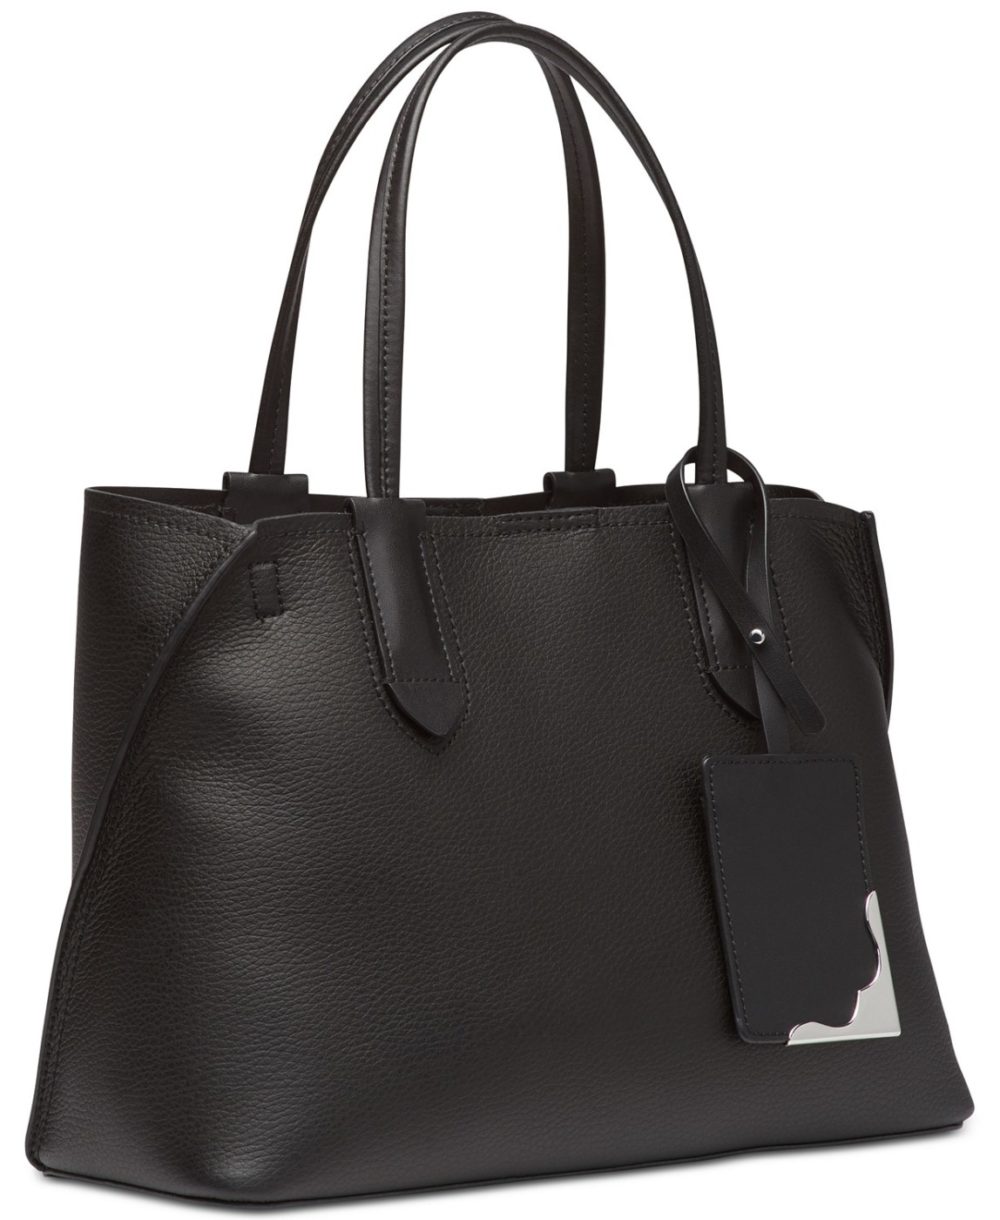 woocommerce-673321-2209615.cloudwaysapps.com-calvin-klein-black-pebbled-leather-jacky-tote-bag